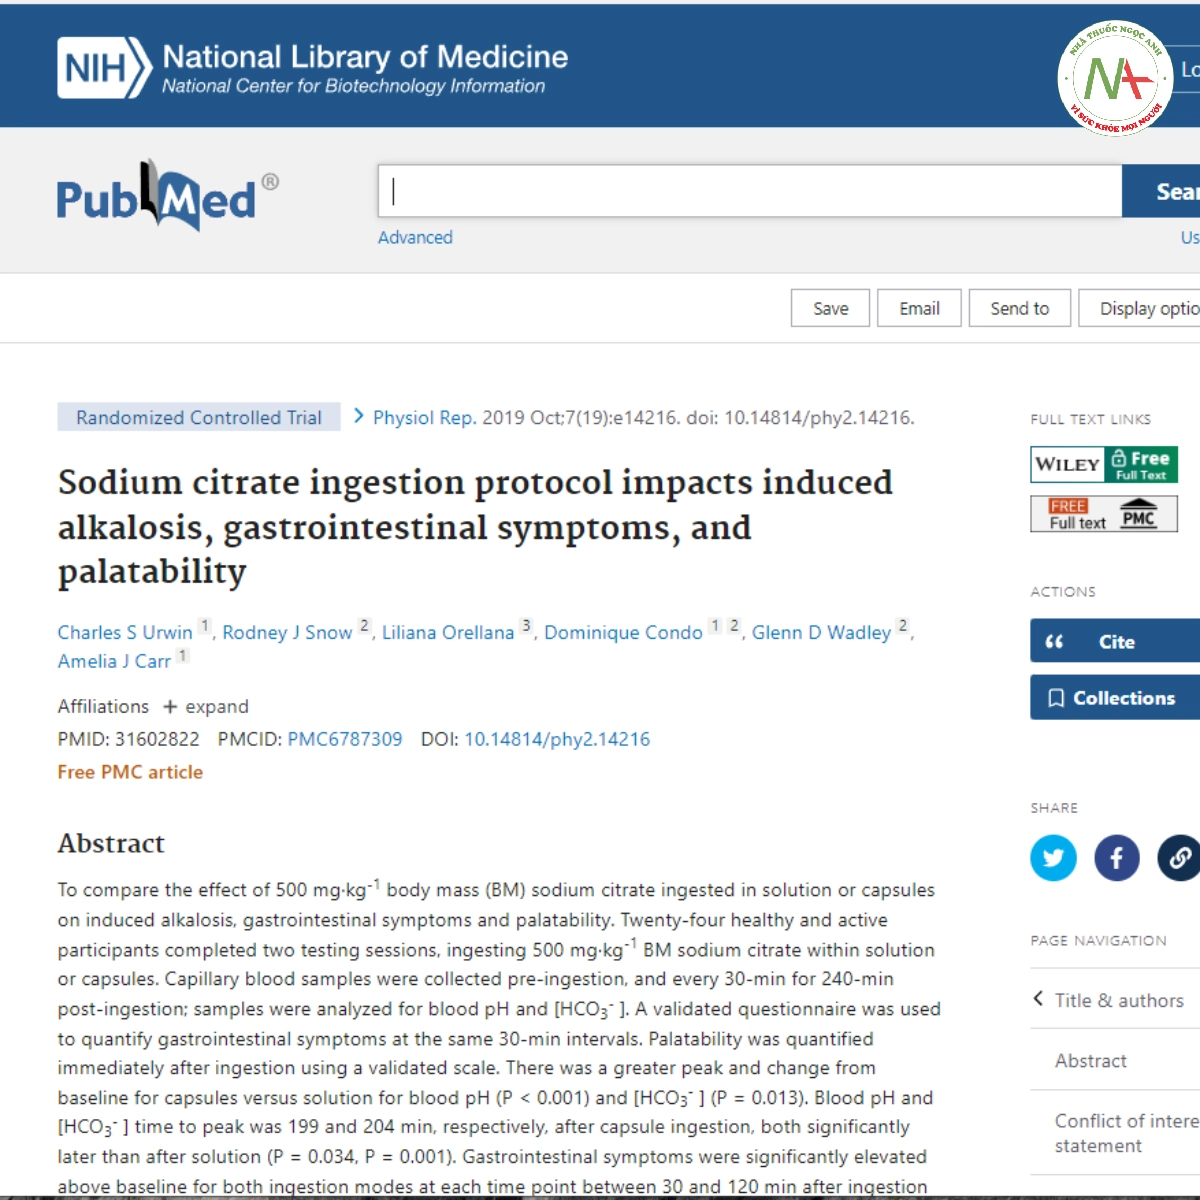 Sodium citrate ingestion protocol impacts induced alkalosis, gastrointestinal symptoms, and palatability